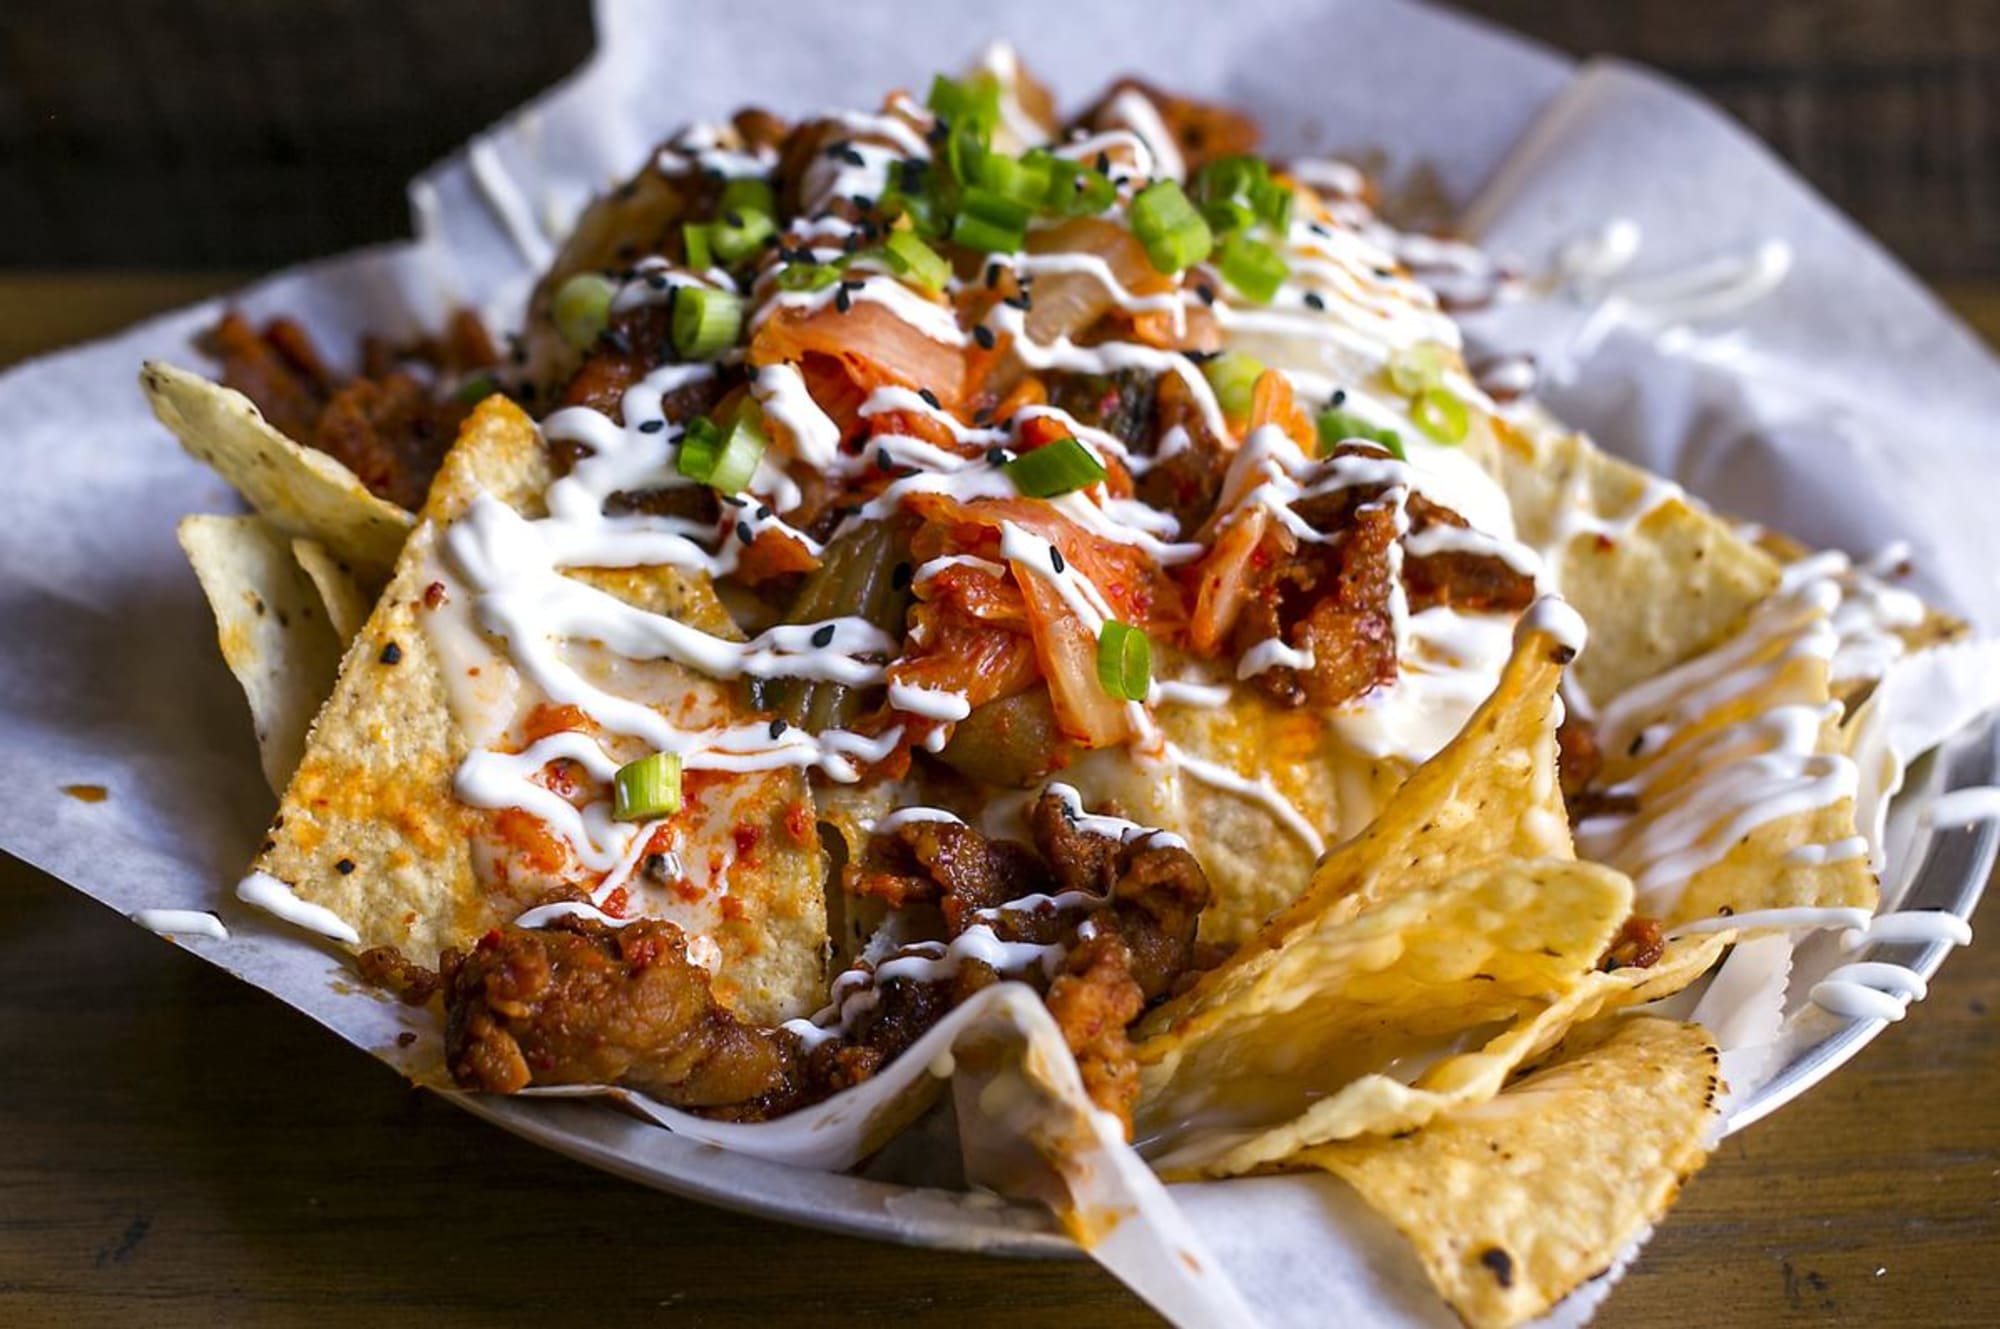 Super Nachos For At Home Super Bowl Watching Parties